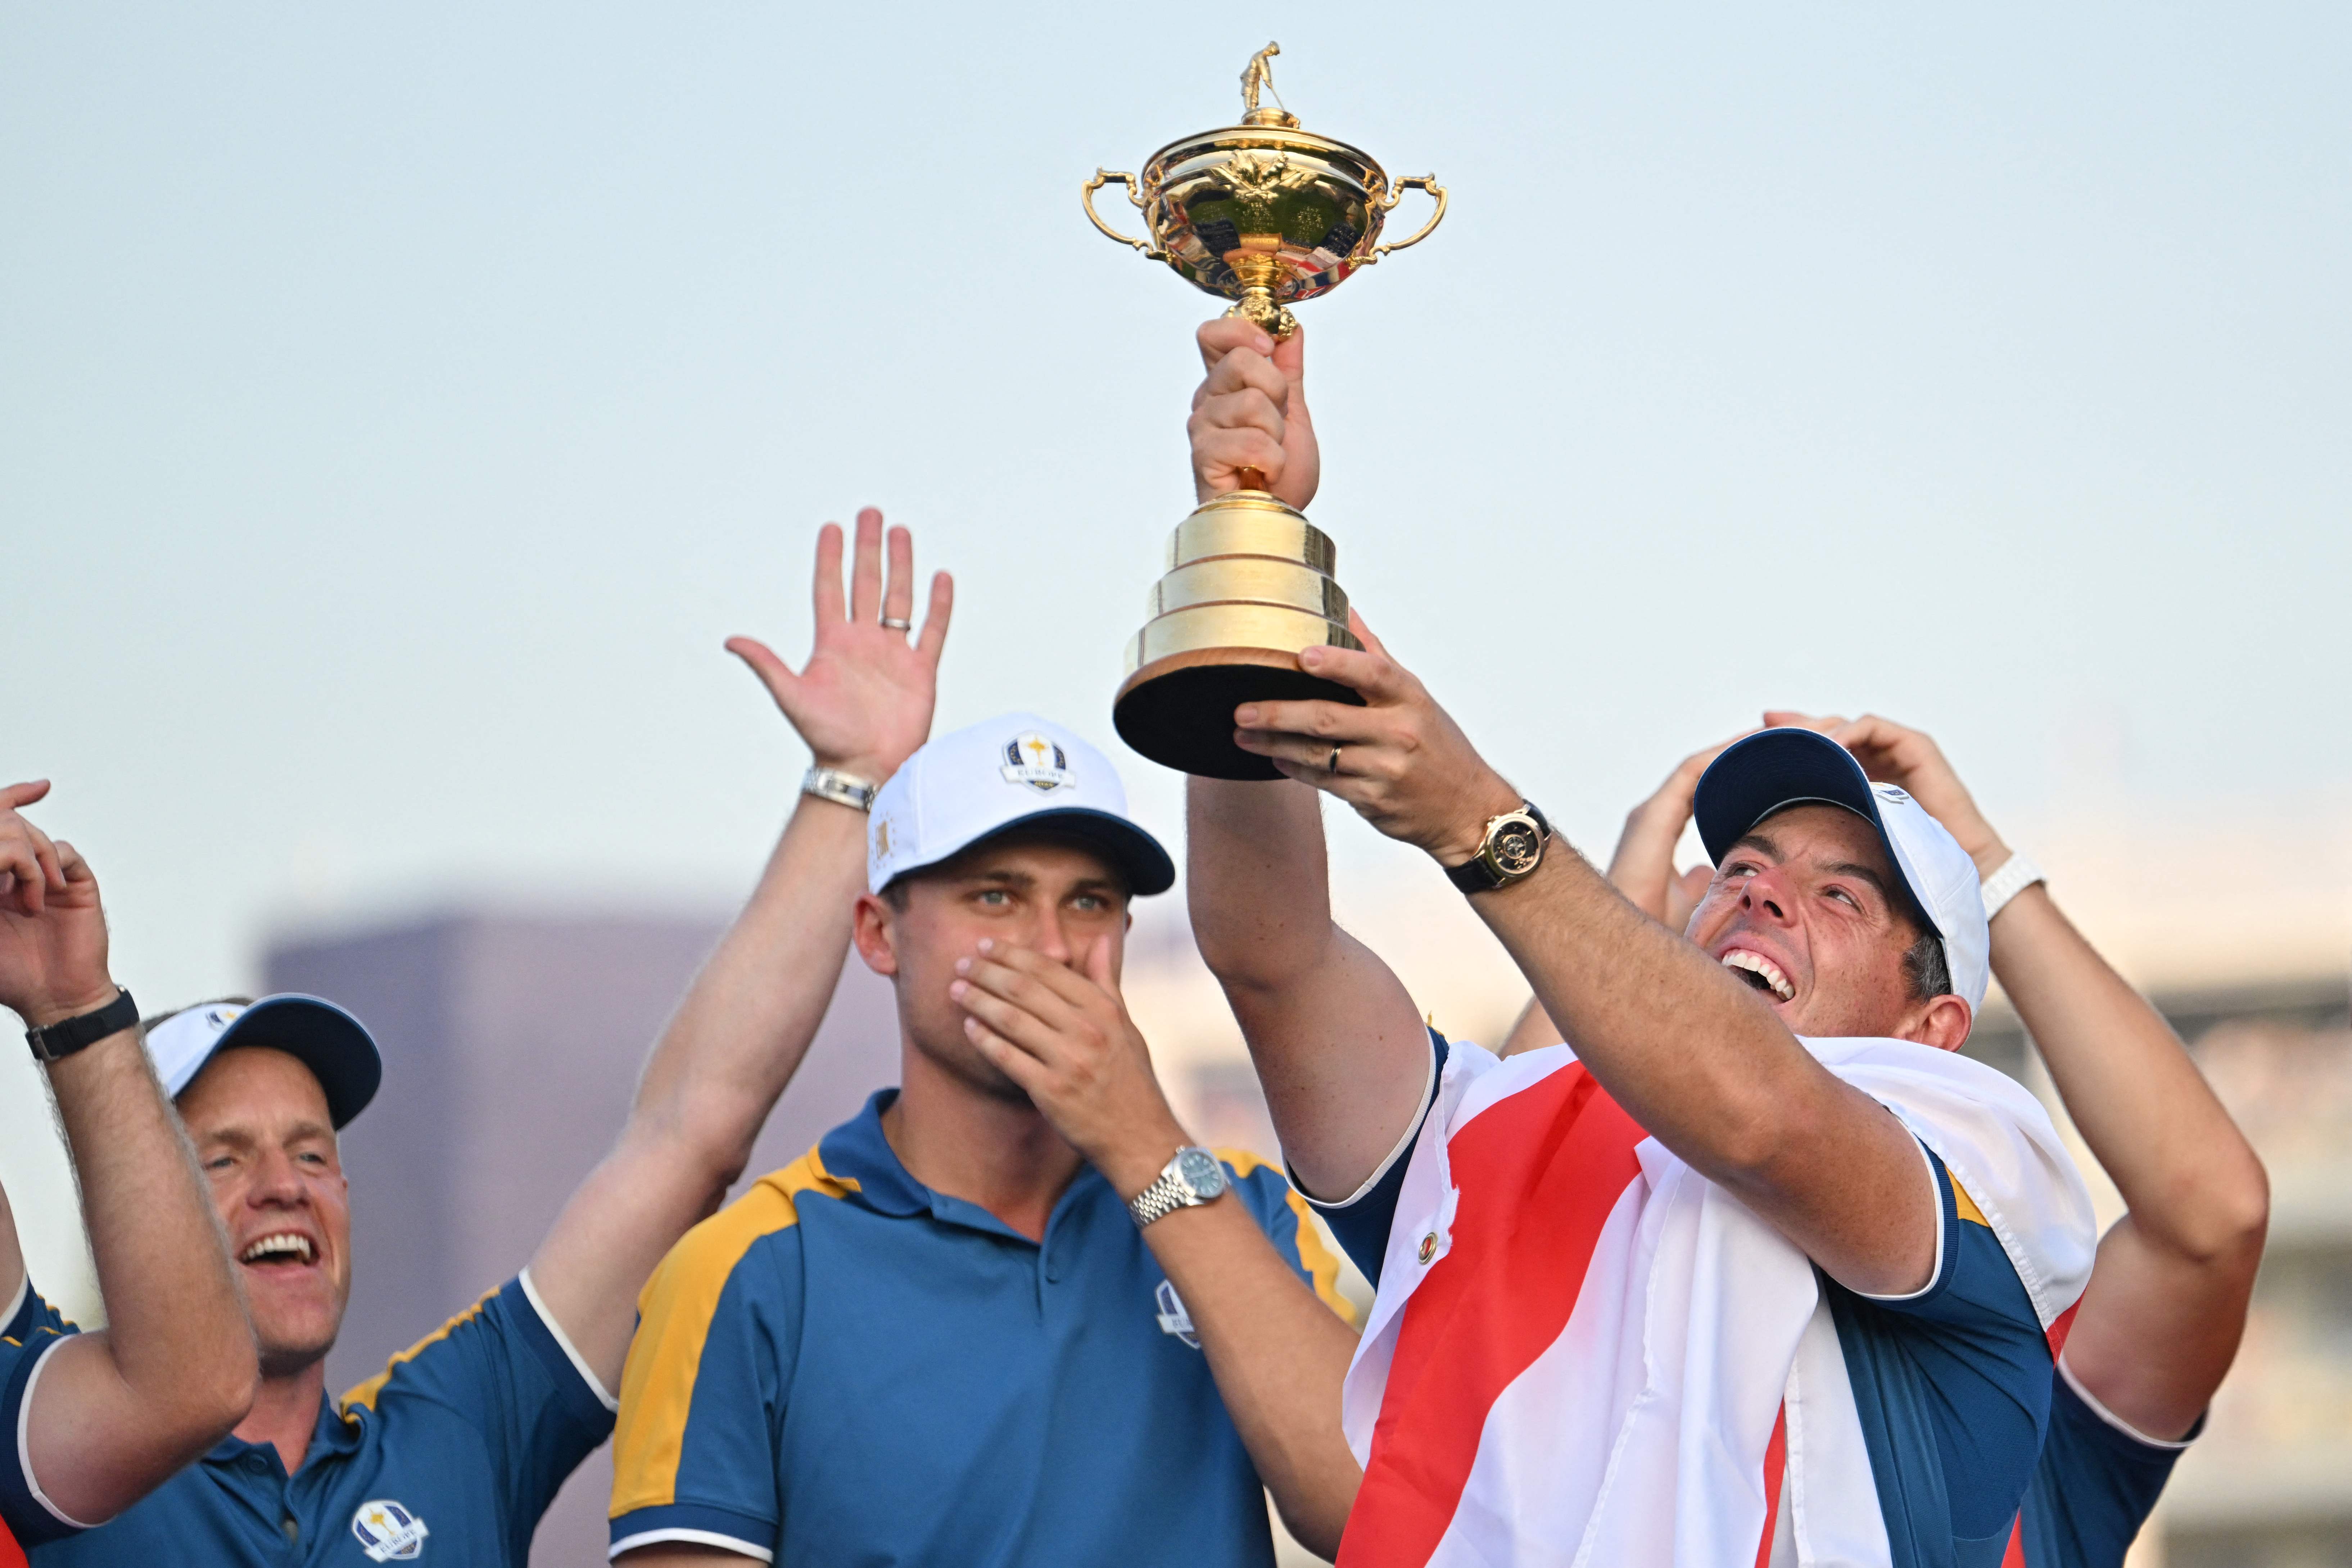 Rory McIlroy thanks 'amazing fans' at Italian Open despite coming up short  as golf star hypes up 2023 Ryder Cup